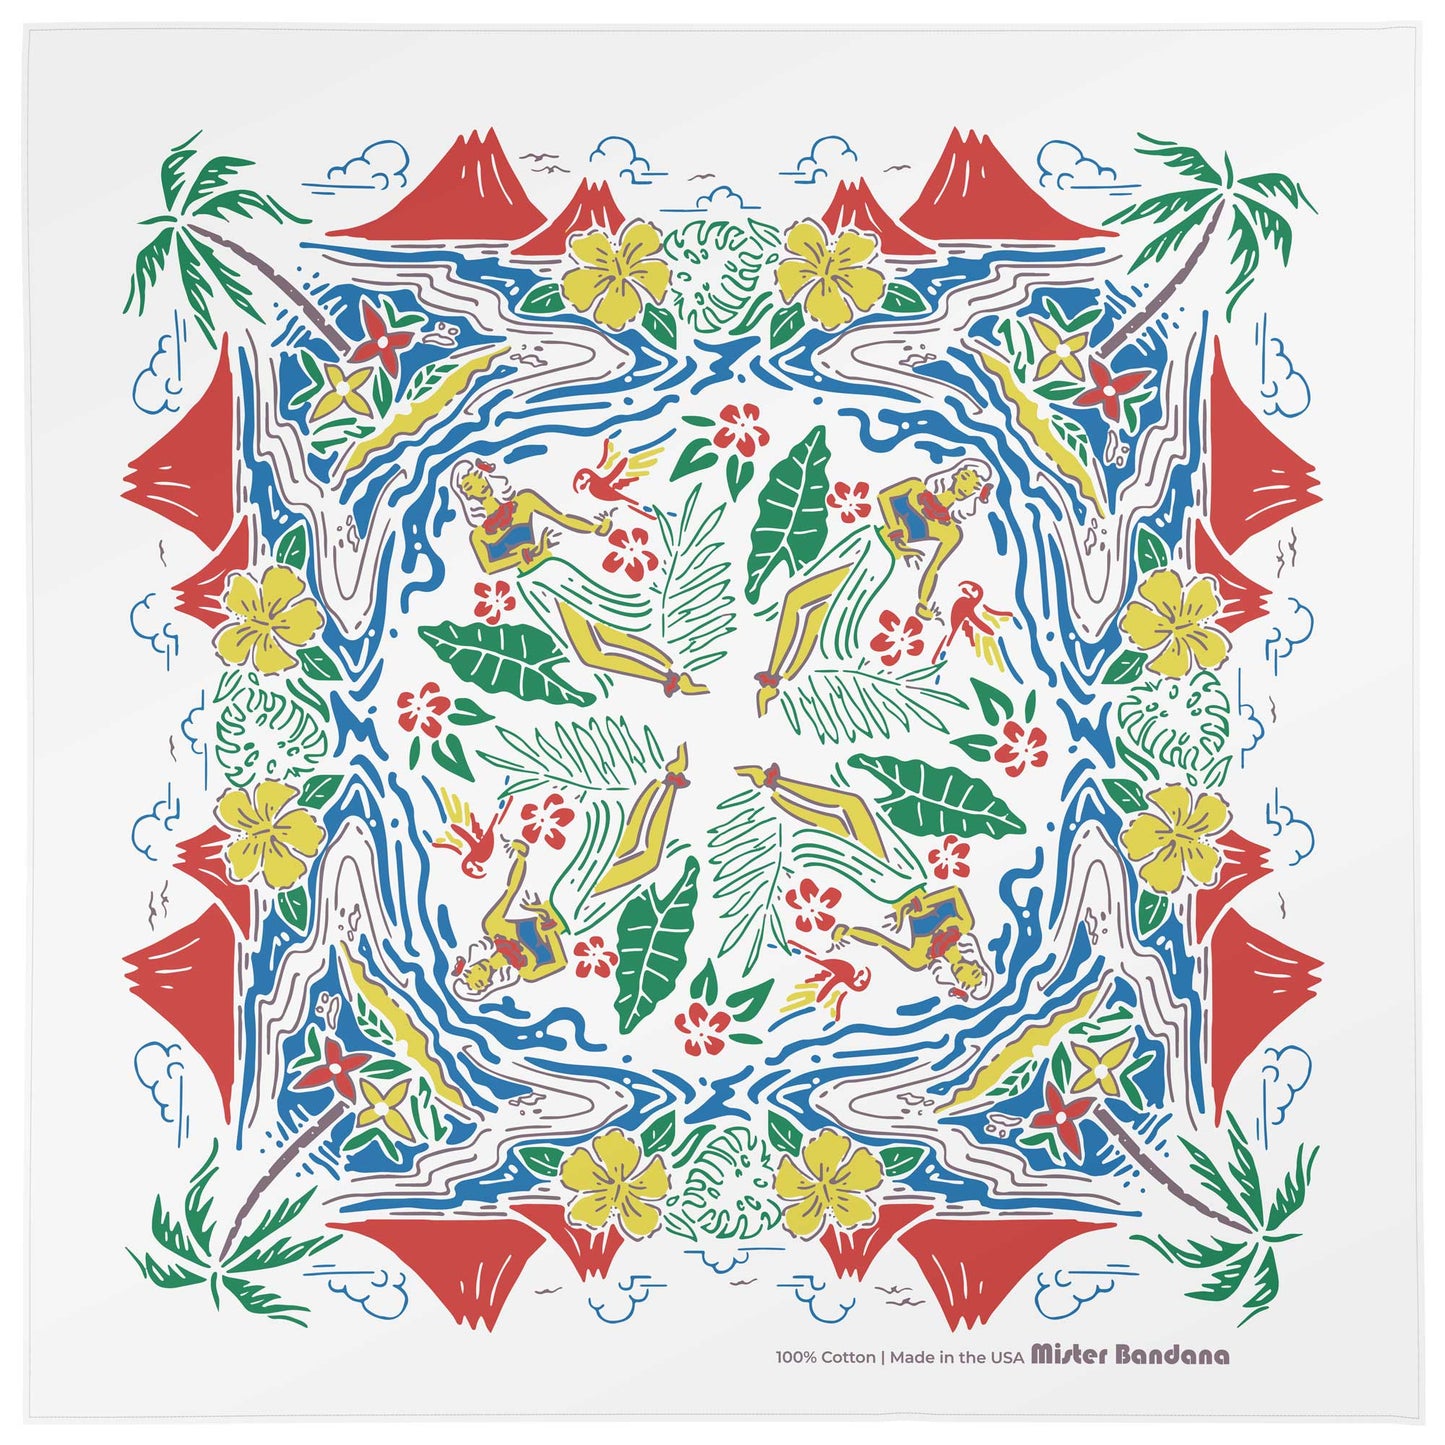 Behold the ALOHA Hawaiian bandana, made in the USA. Volcanoes erupt. Palm trees sway. Maidens beckon to the gods. Parrots fly by, squawking melodically. This is what people experience when you walk into the room, whilst wearing the ALOHA bandana. Size: 22" x 22" Material: 100% cotton, water-based inks. Cotton milled in South Carolina, printed in California.  Made in the USA 🇺🇸 